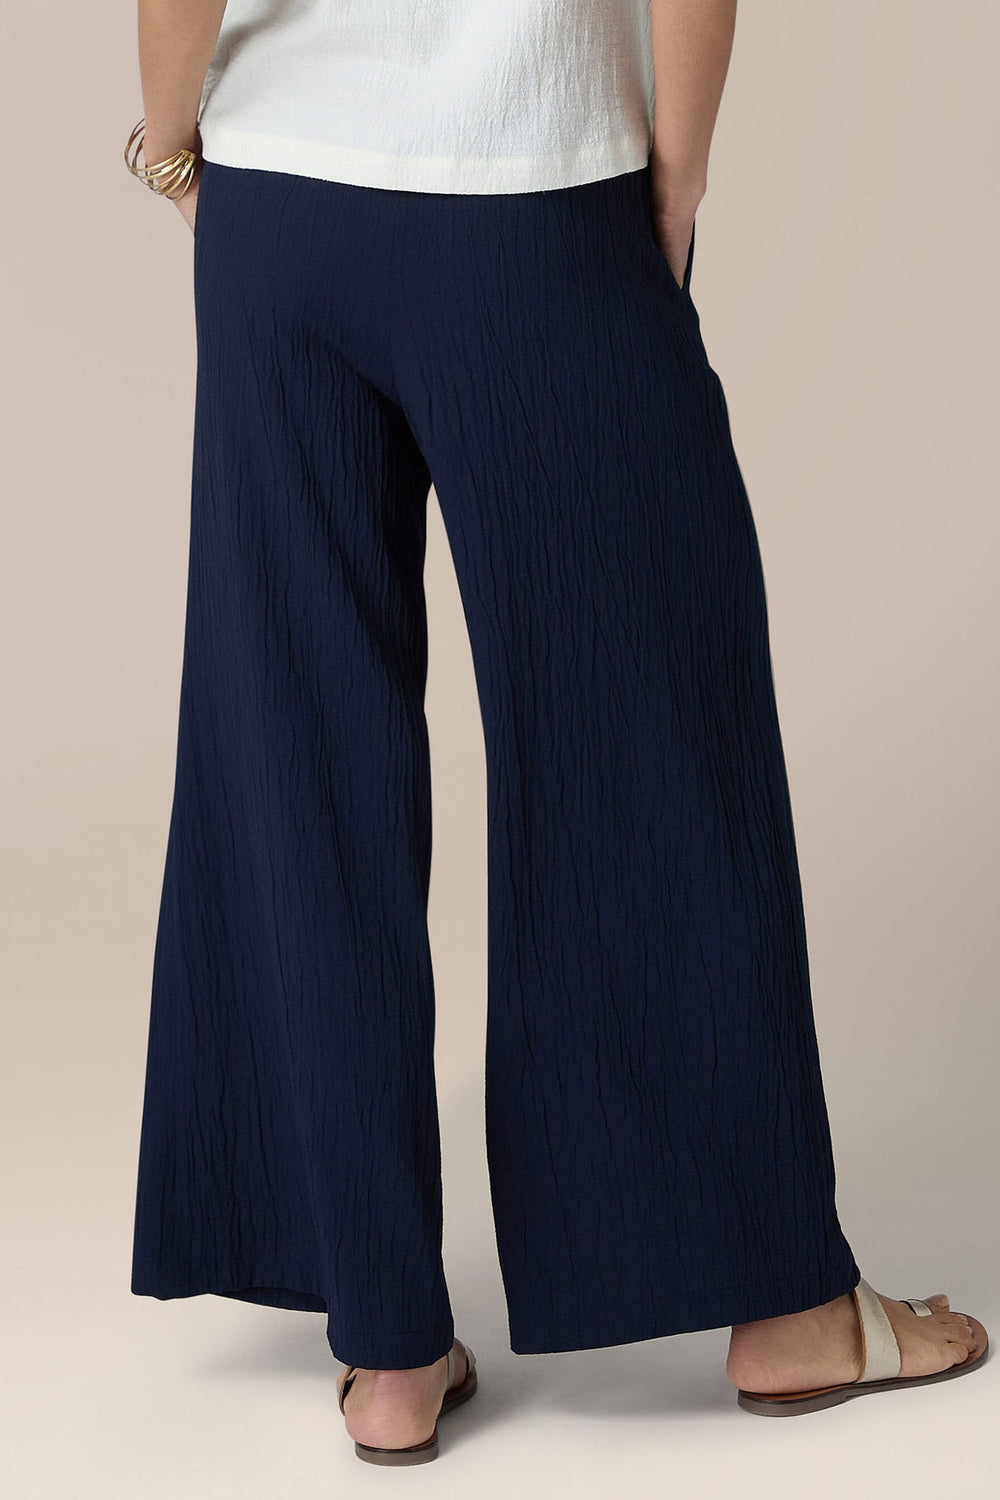 Sahara SPP5736-CSV Night Navy Crinkle Soft Viscose Wide Trouser - Experience Boutique